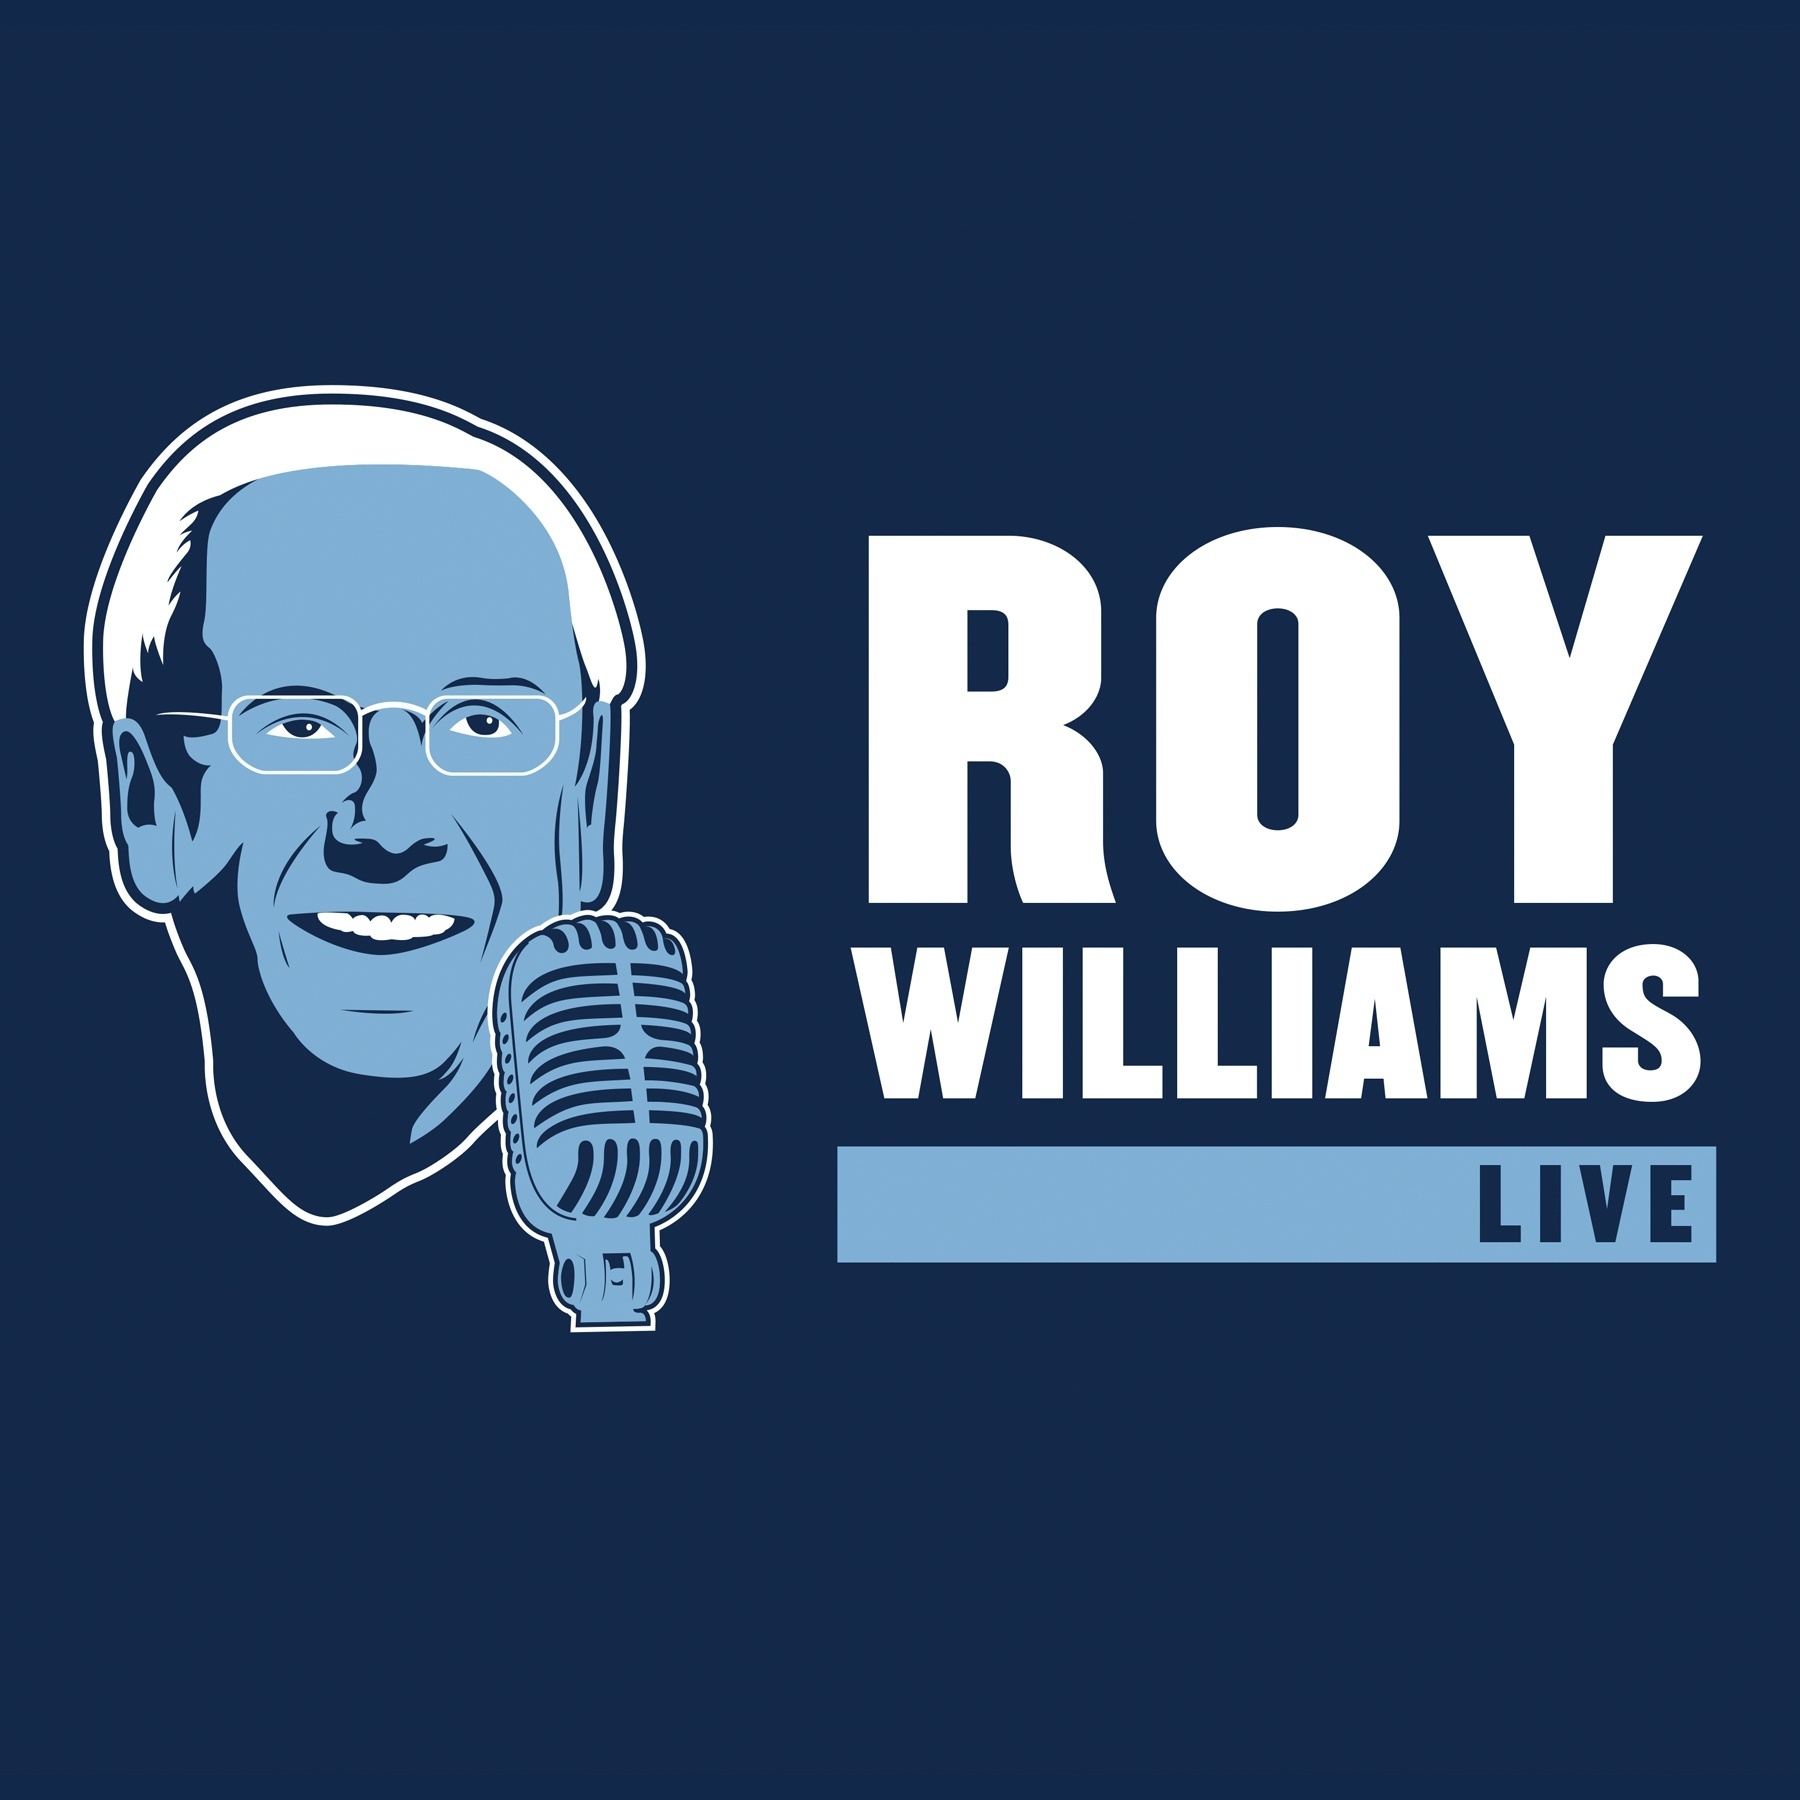 Roy Williams Live from 12/11/17